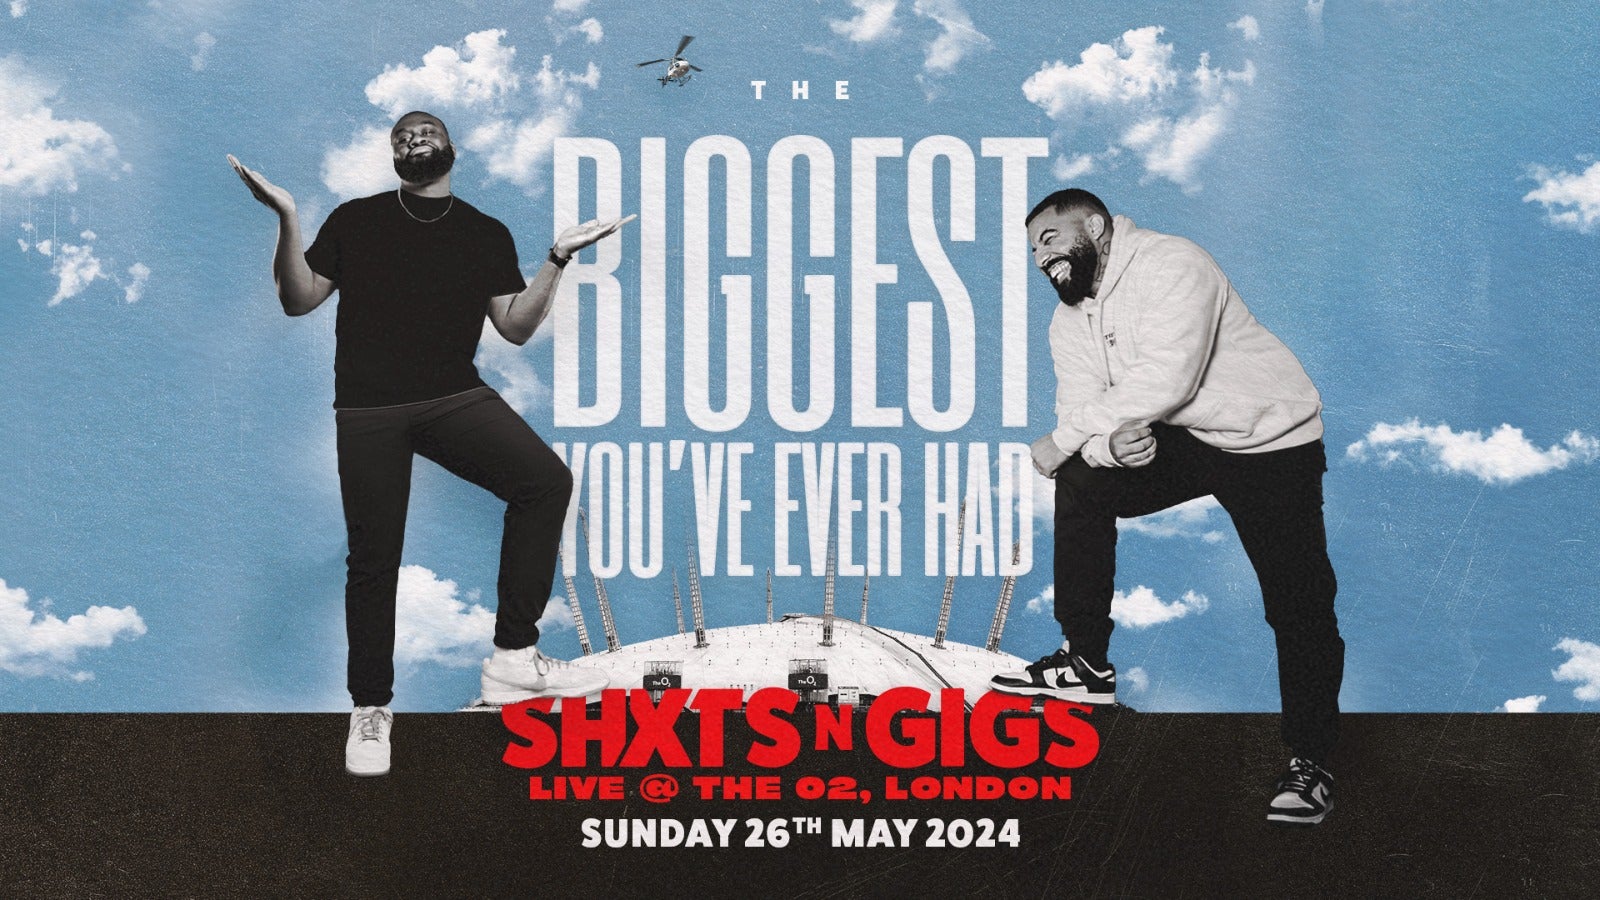 Event image for  shxtsngigs at The O2 on 26 May,2024 featuring the presenters posing standing next to an image of The O2. .